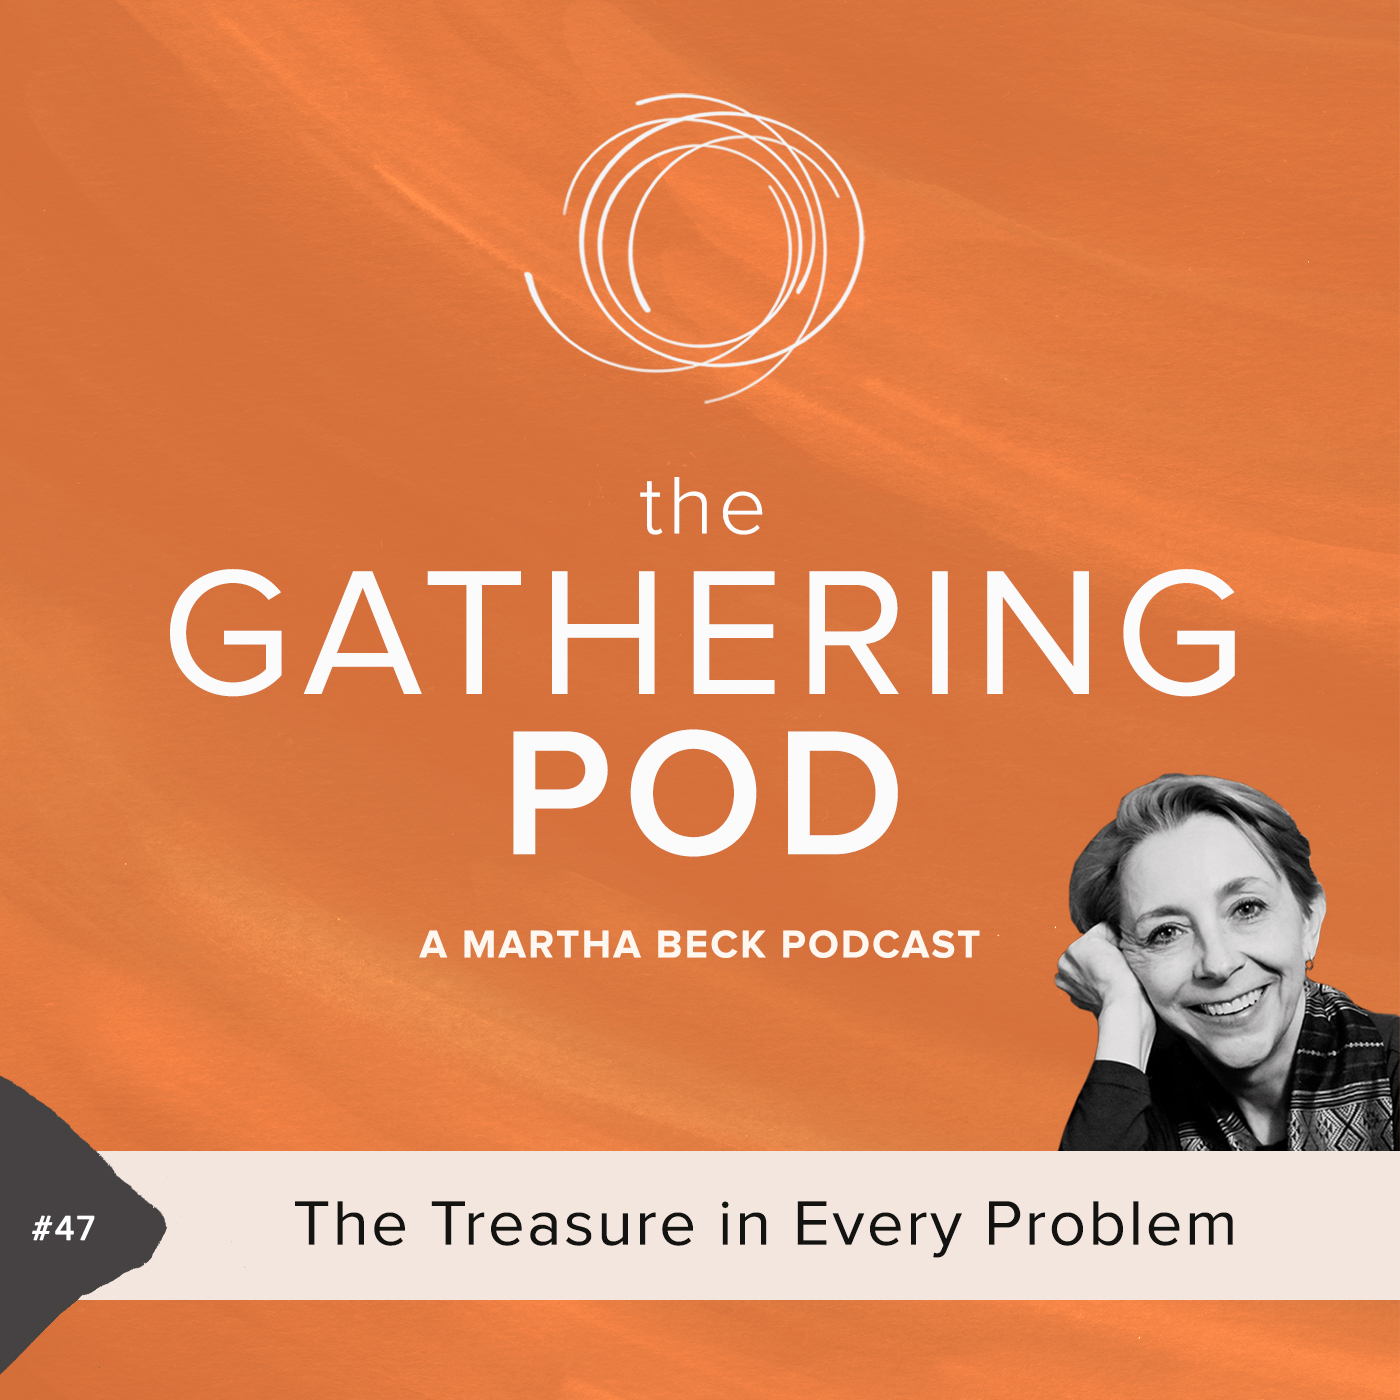 Image for The Gathering Pod A Martha Beck Podcast Episode #47 The Treasure in Every Problem